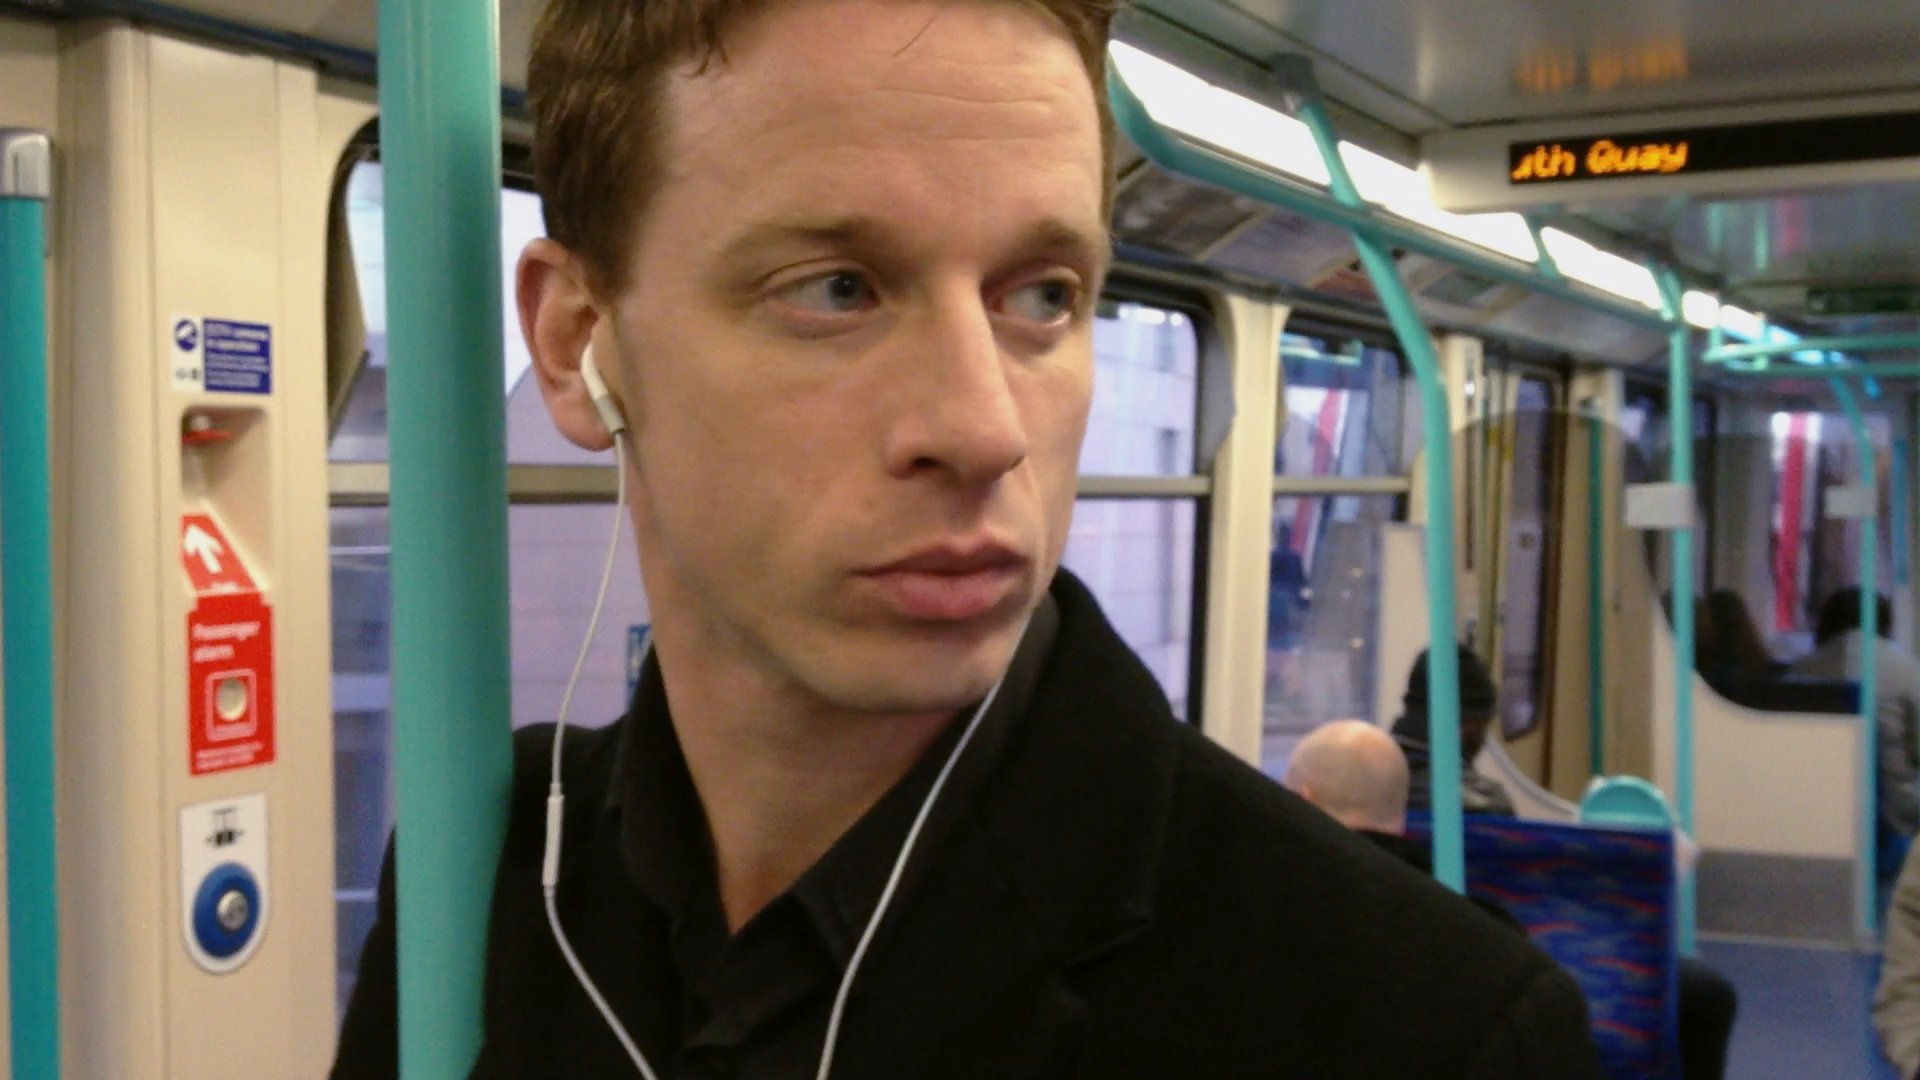 Still of Benjamin Green in the Without Subtitles segment of Modern Love